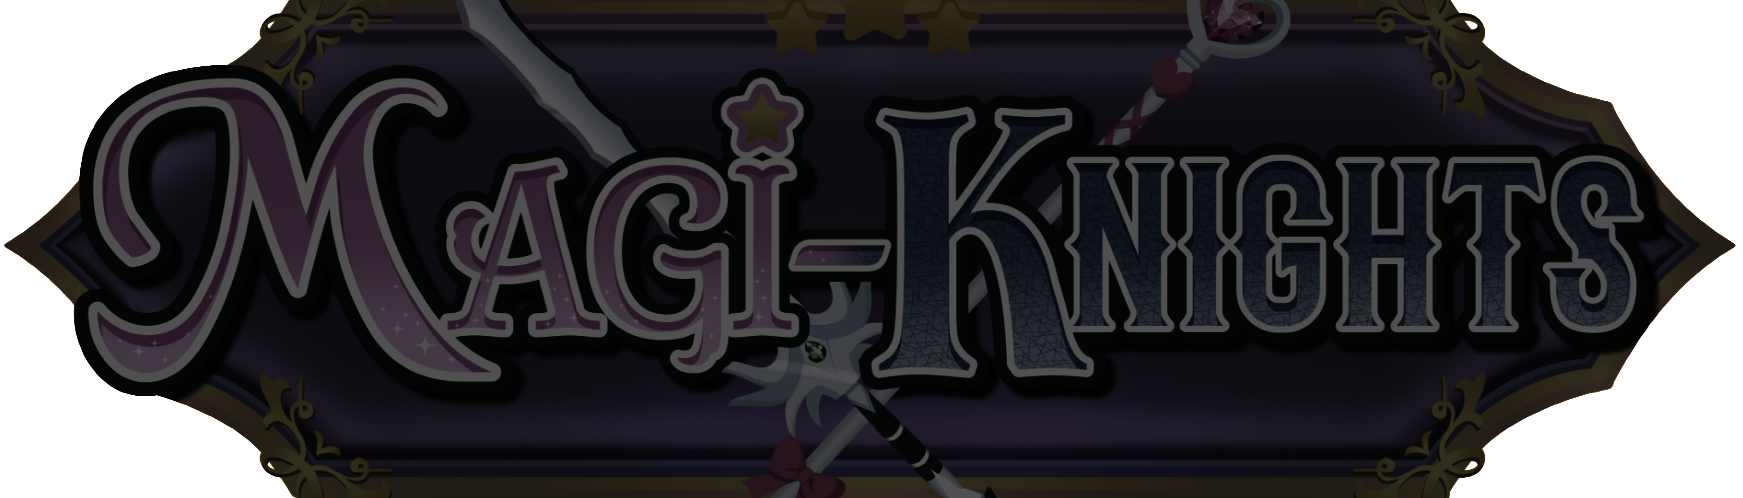 Magi-Knights: The Roleplaying Game by Magi-Knights Project — Kickstarter